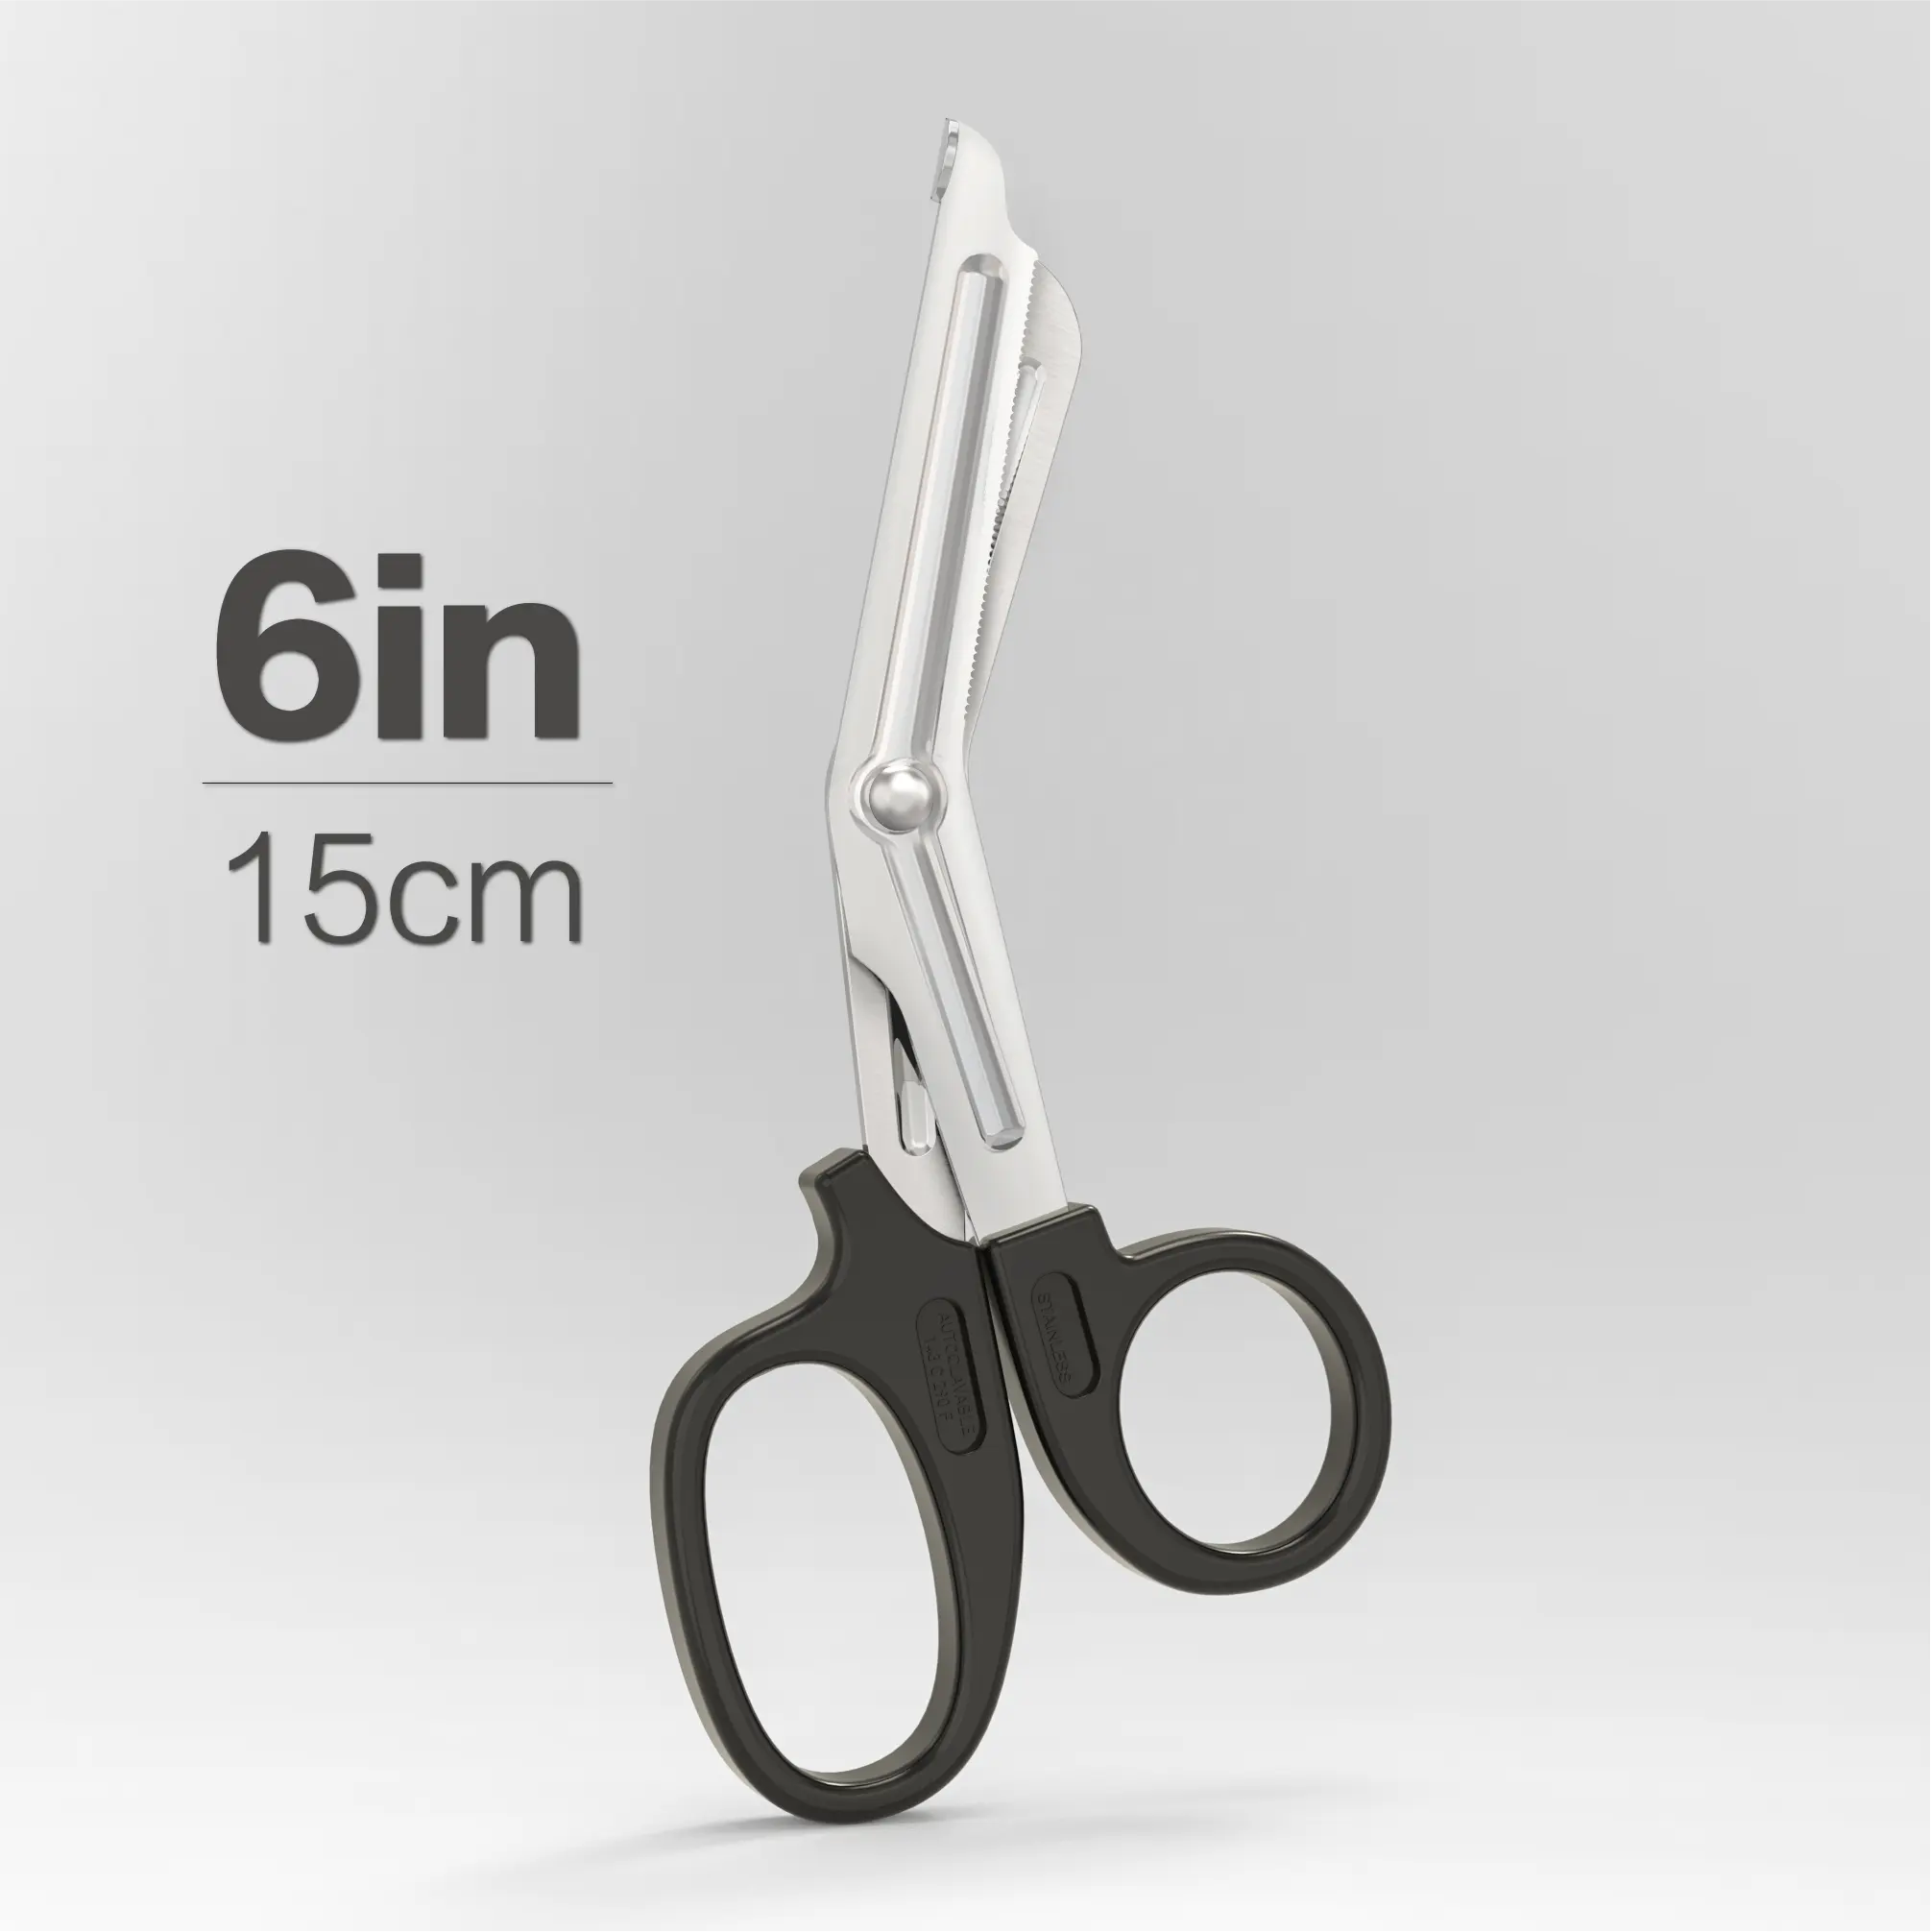 Trauma Shears 6 15cm Made of Stainless Steel Fluoride-Coated Medical Nursing & First aid Bandage Scissors